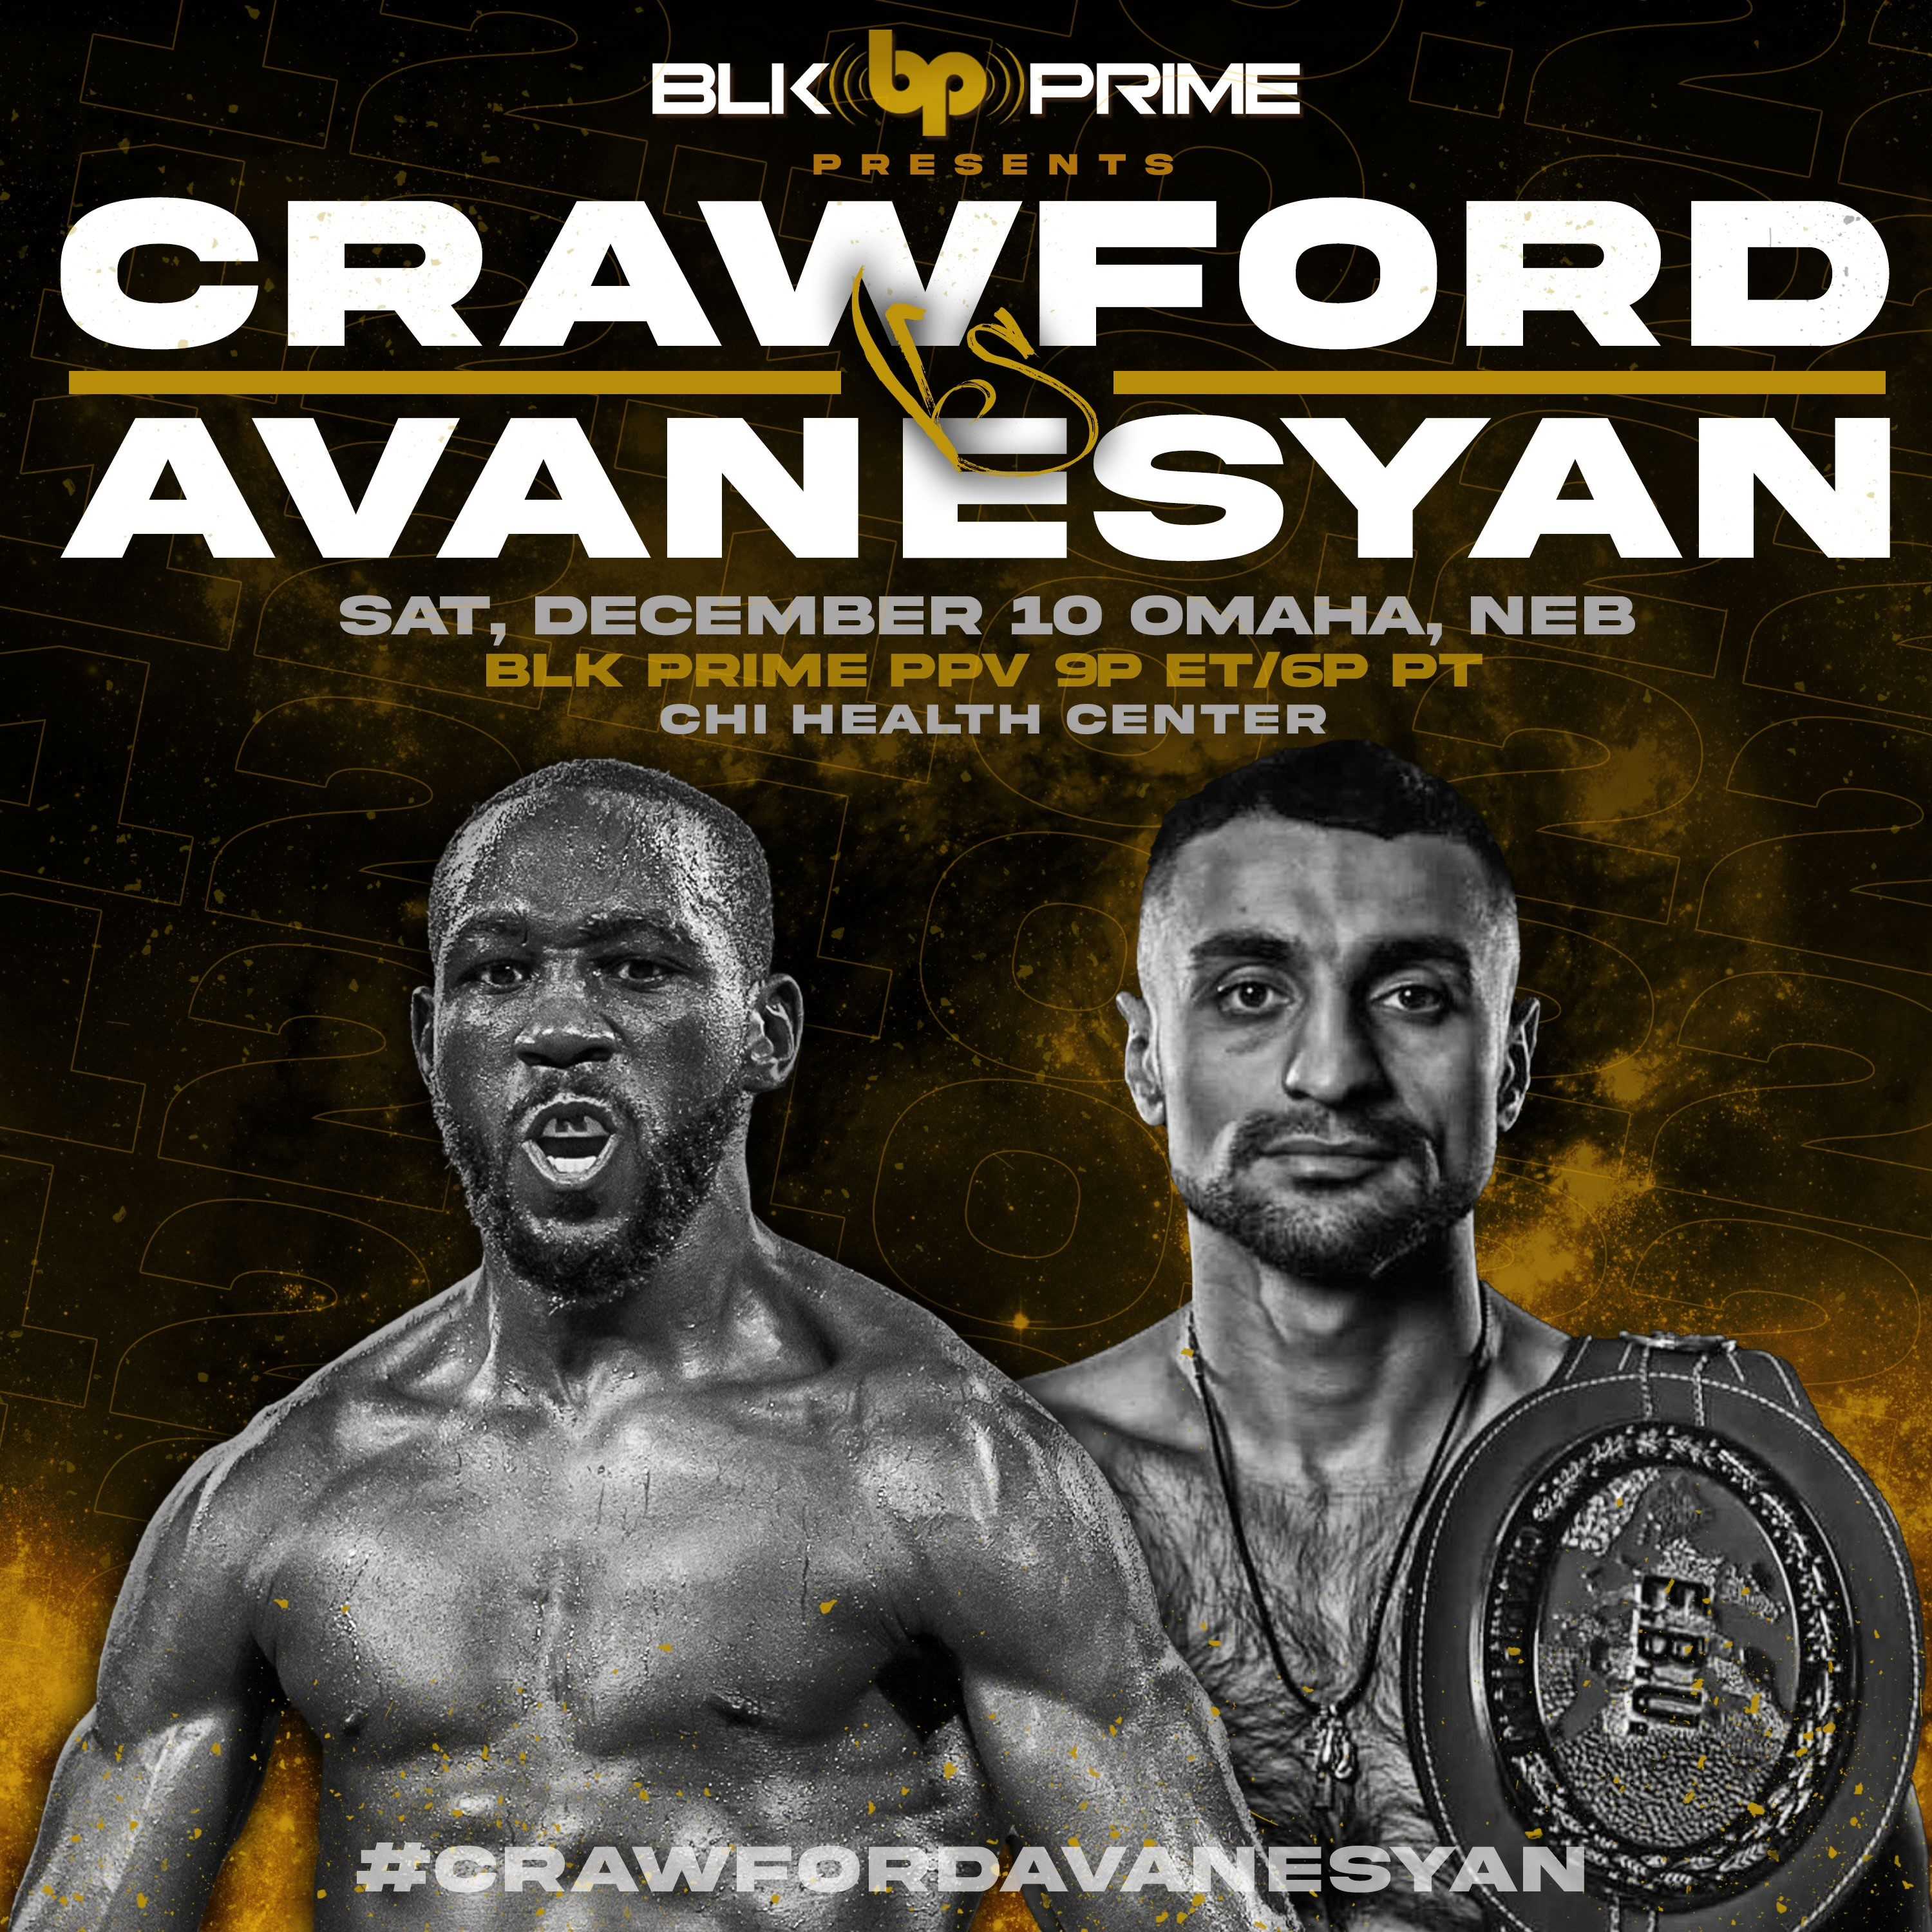 Terence Bud Crawfords upcoming Omaha fight gets ticket sales date